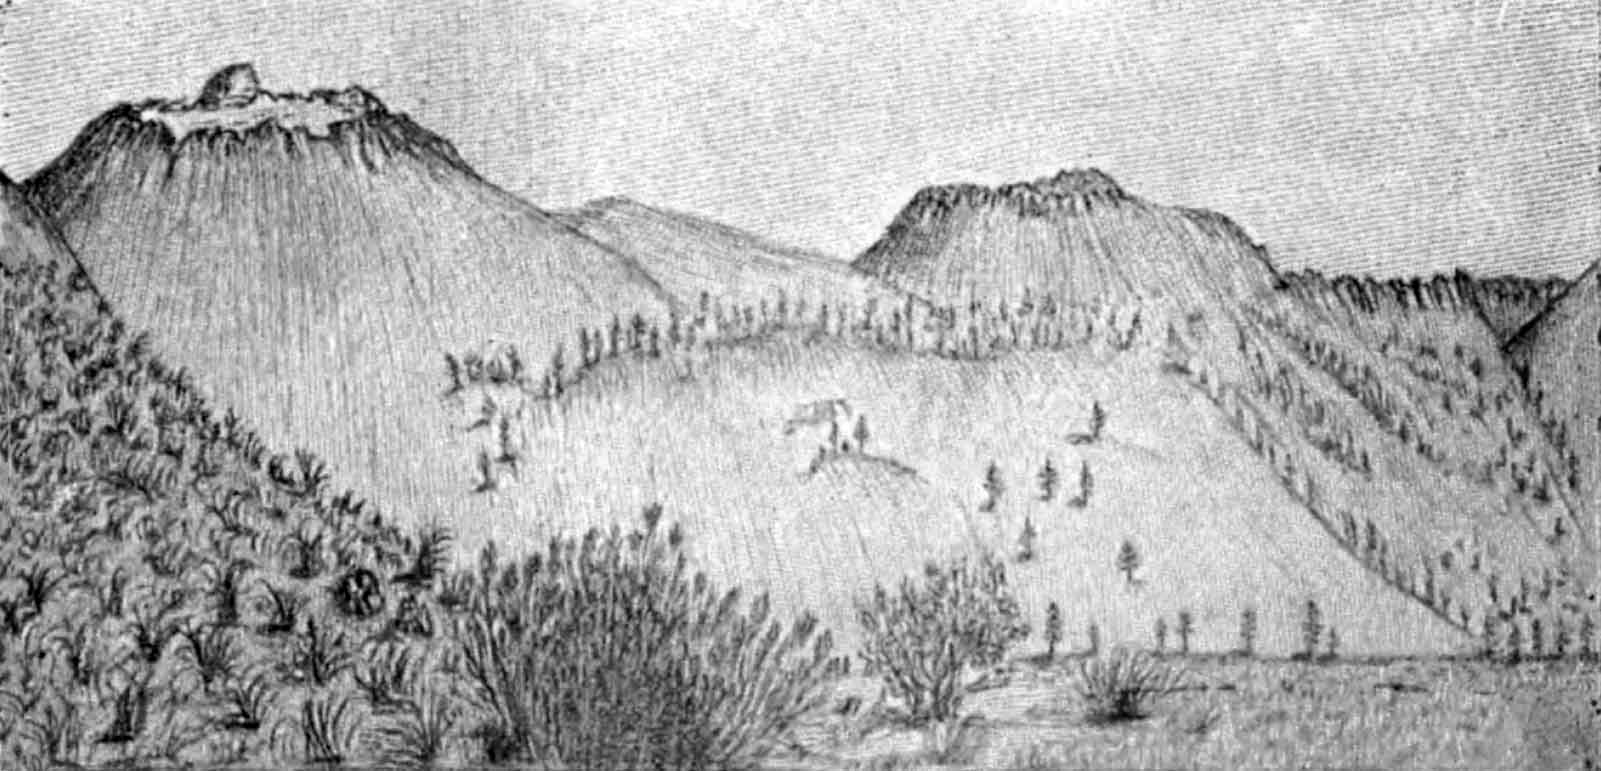 A sketch of several large, barren volcanic cones next to an alpine meadow that consists of a scattering of shrubs and other small plants.